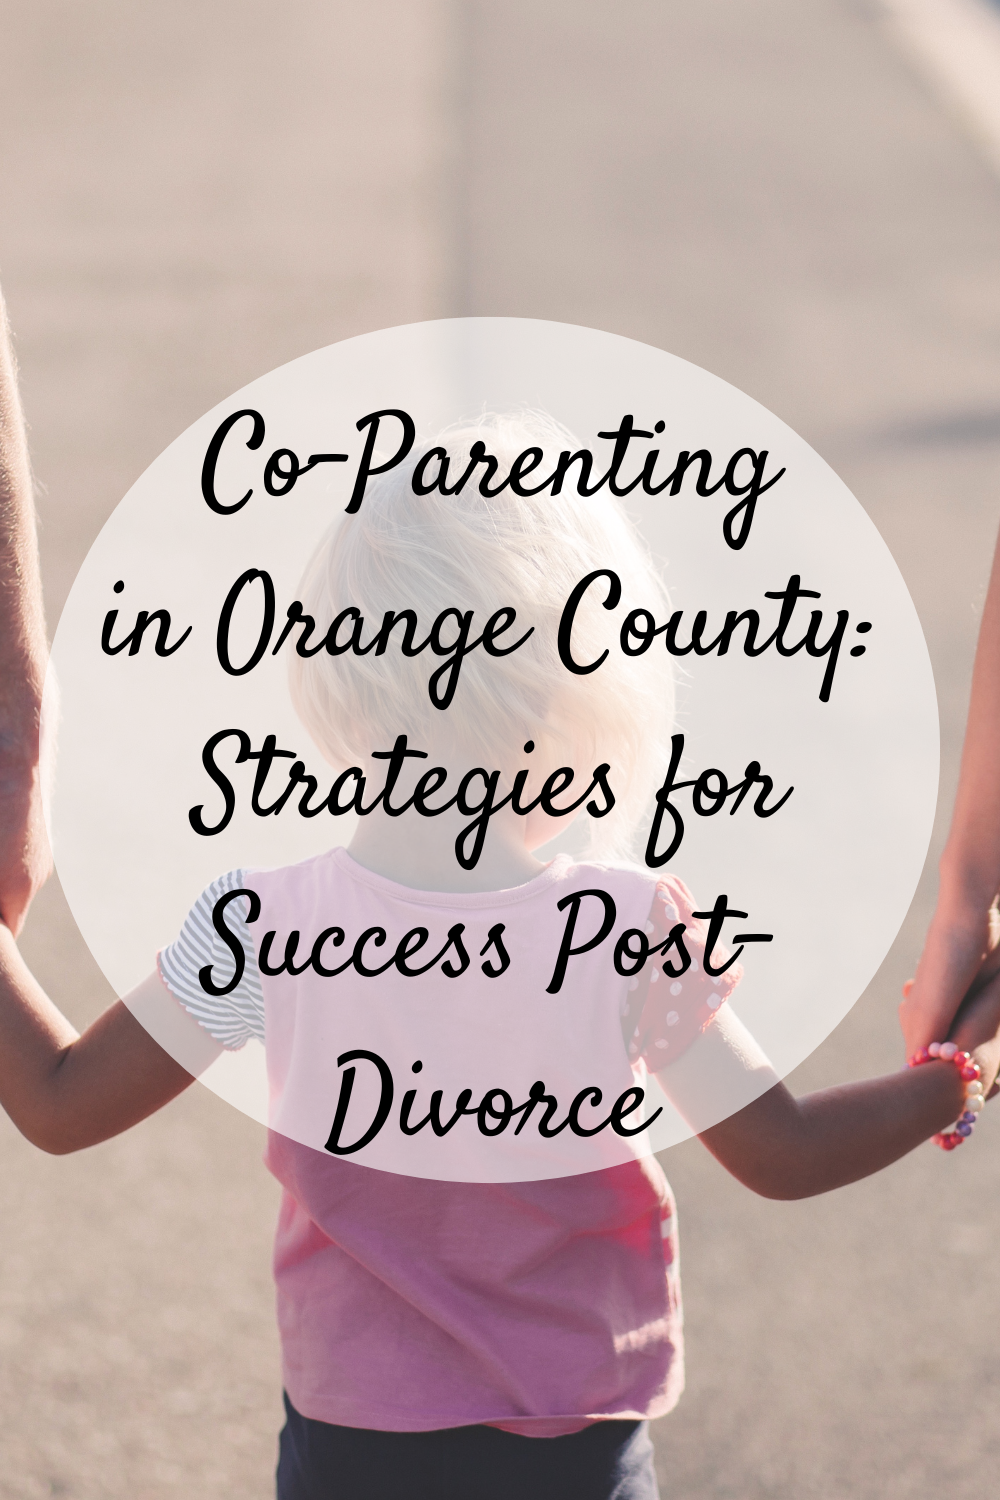 Co-Parenting in Orange County: Strategies for Success Post-Divorce